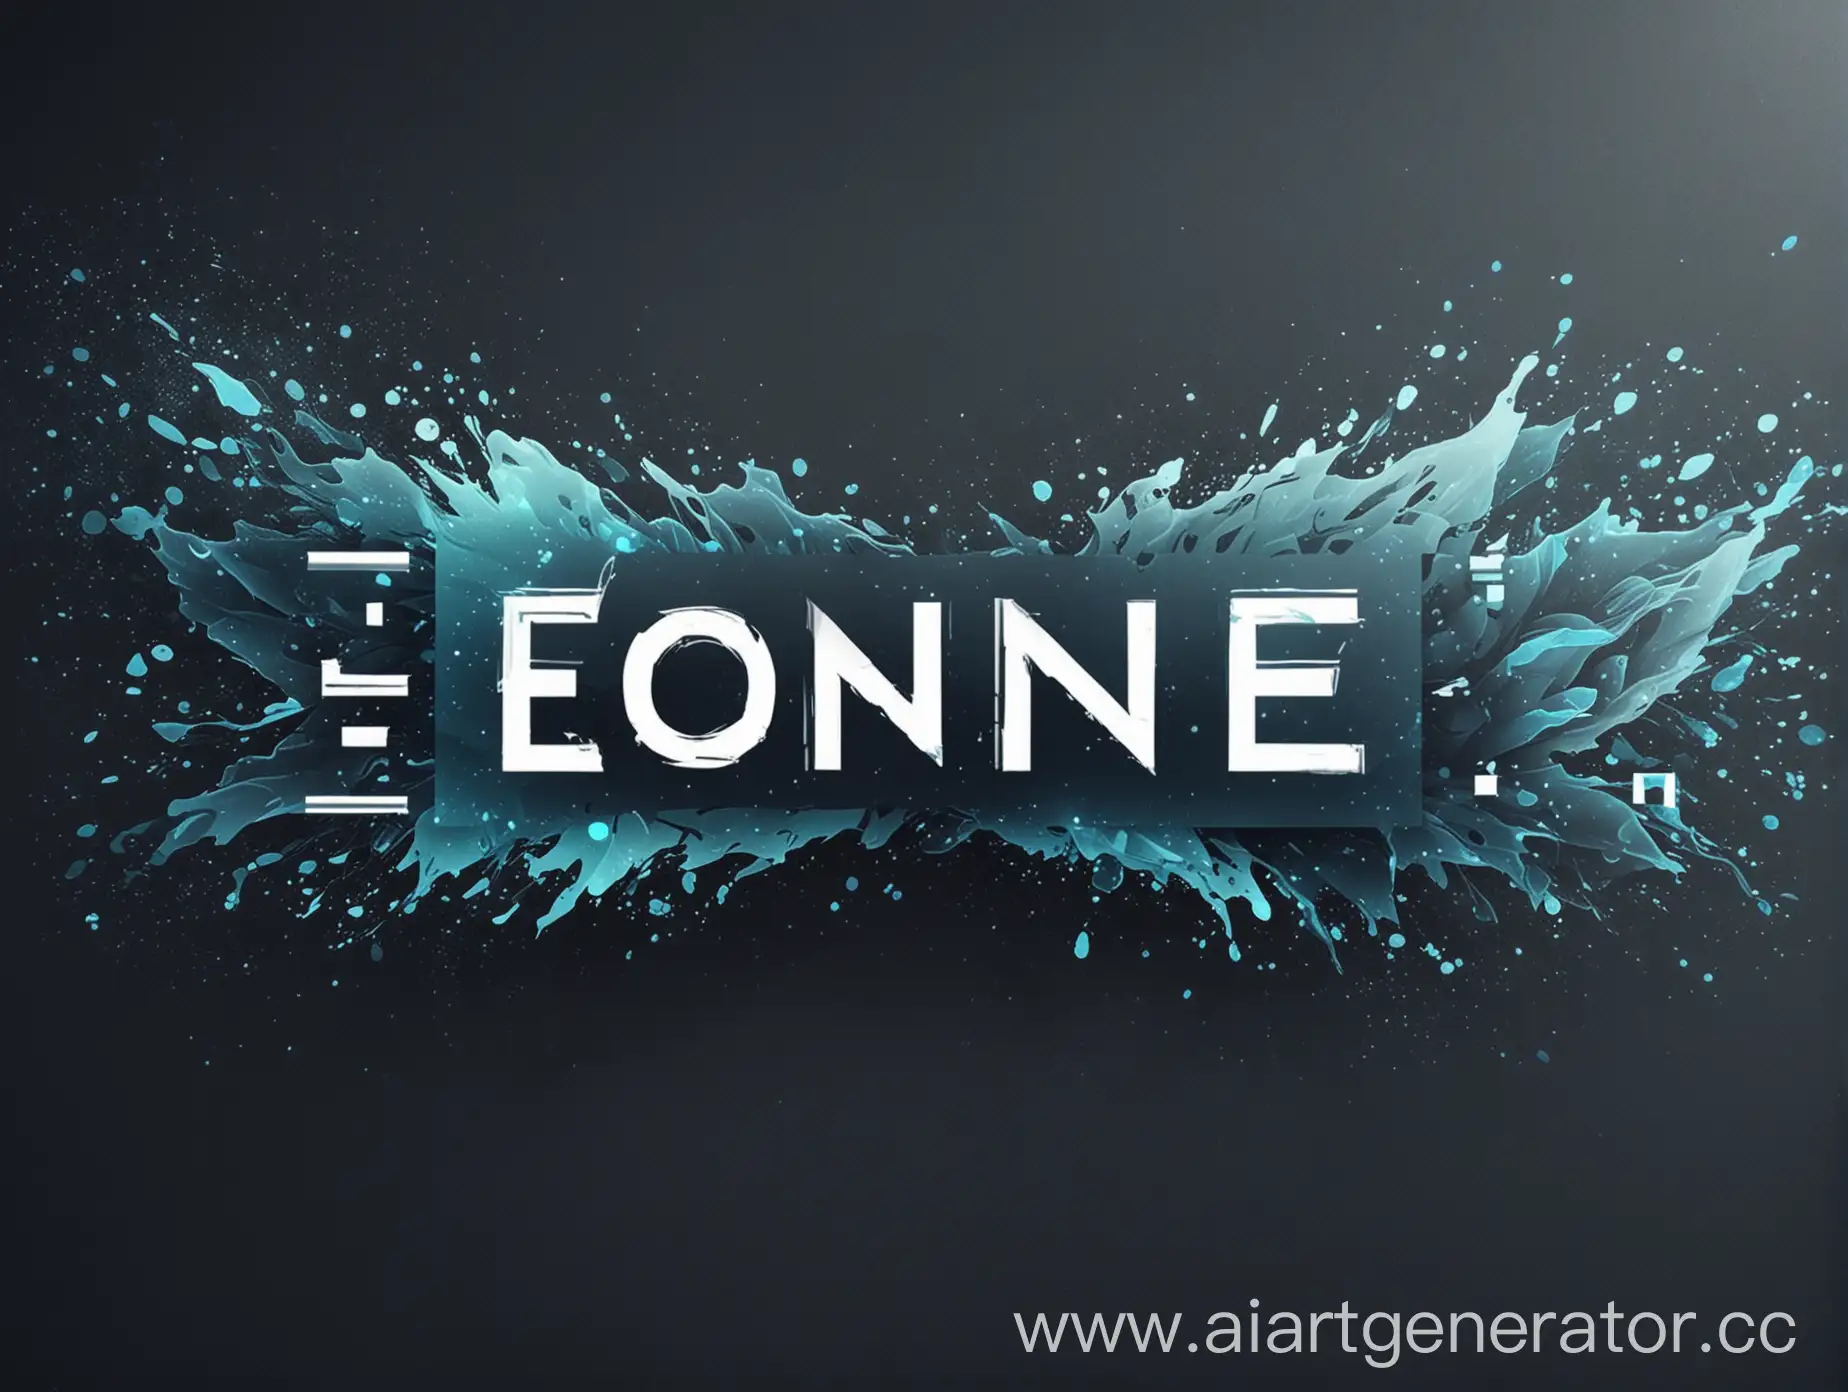 Eoniqe-Logo-Banner-in-Cold-Colors-for-YouTube-Channel